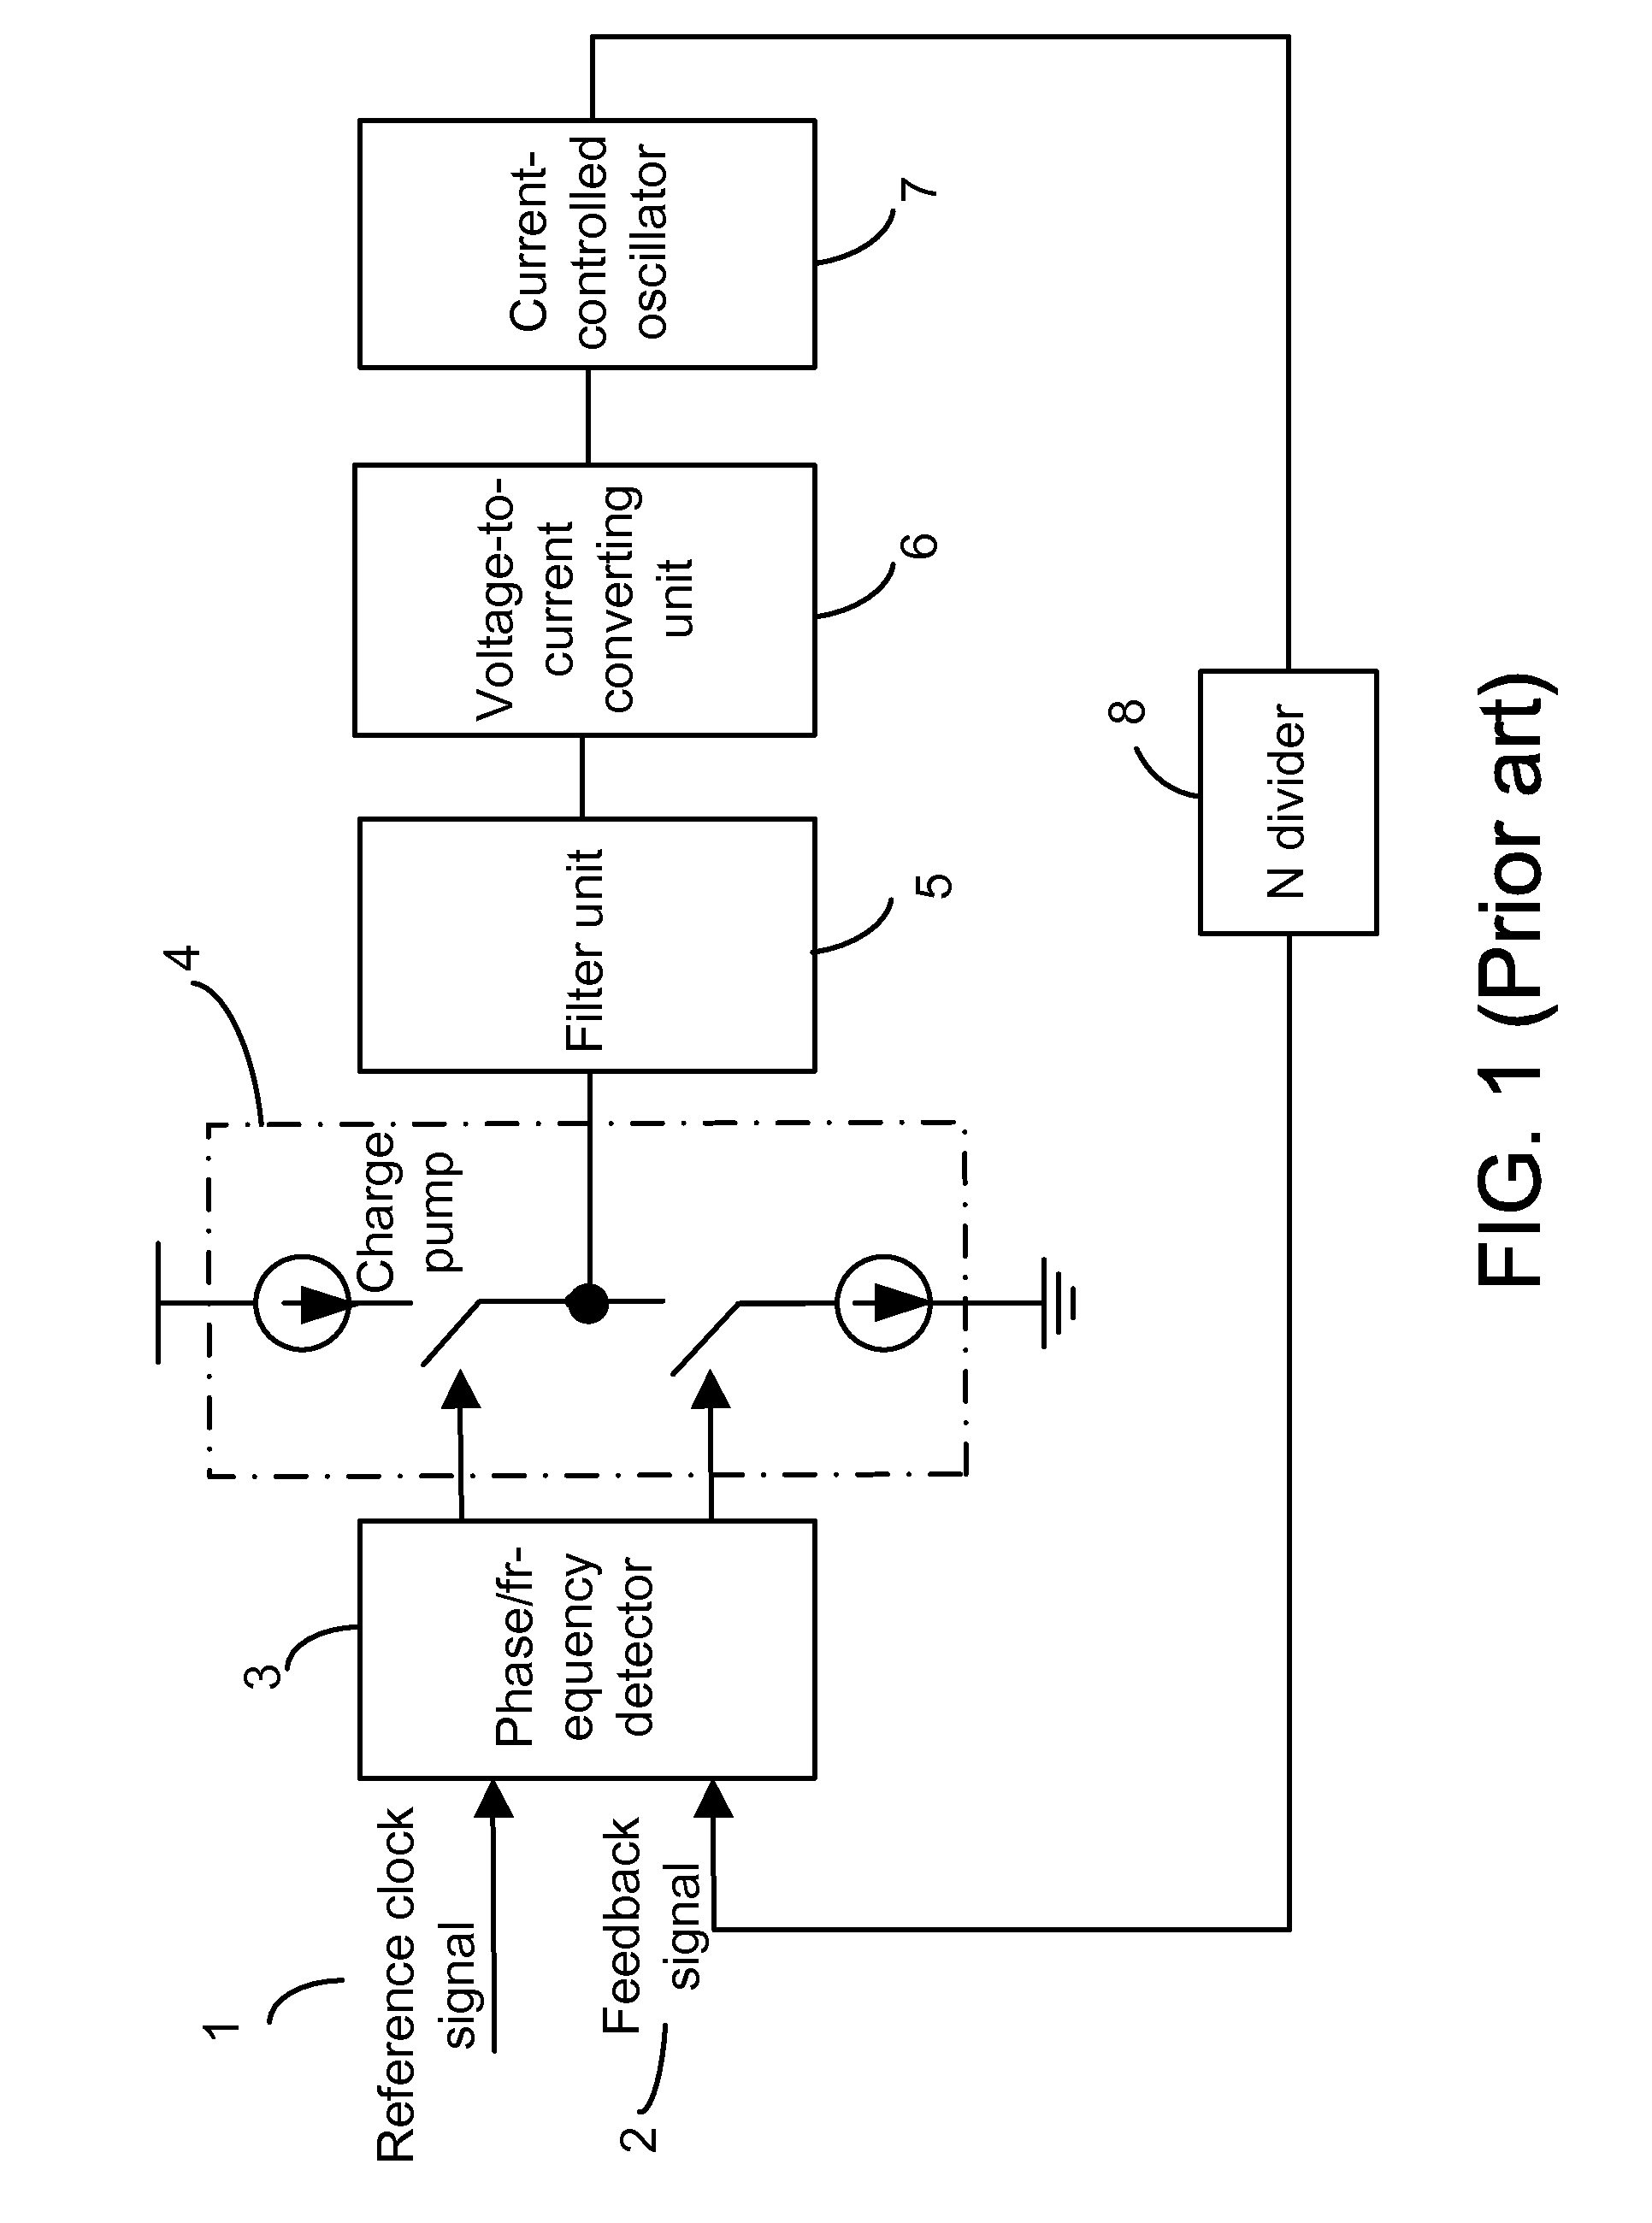 Dual phase-locked loop circuit and method for controlling the same